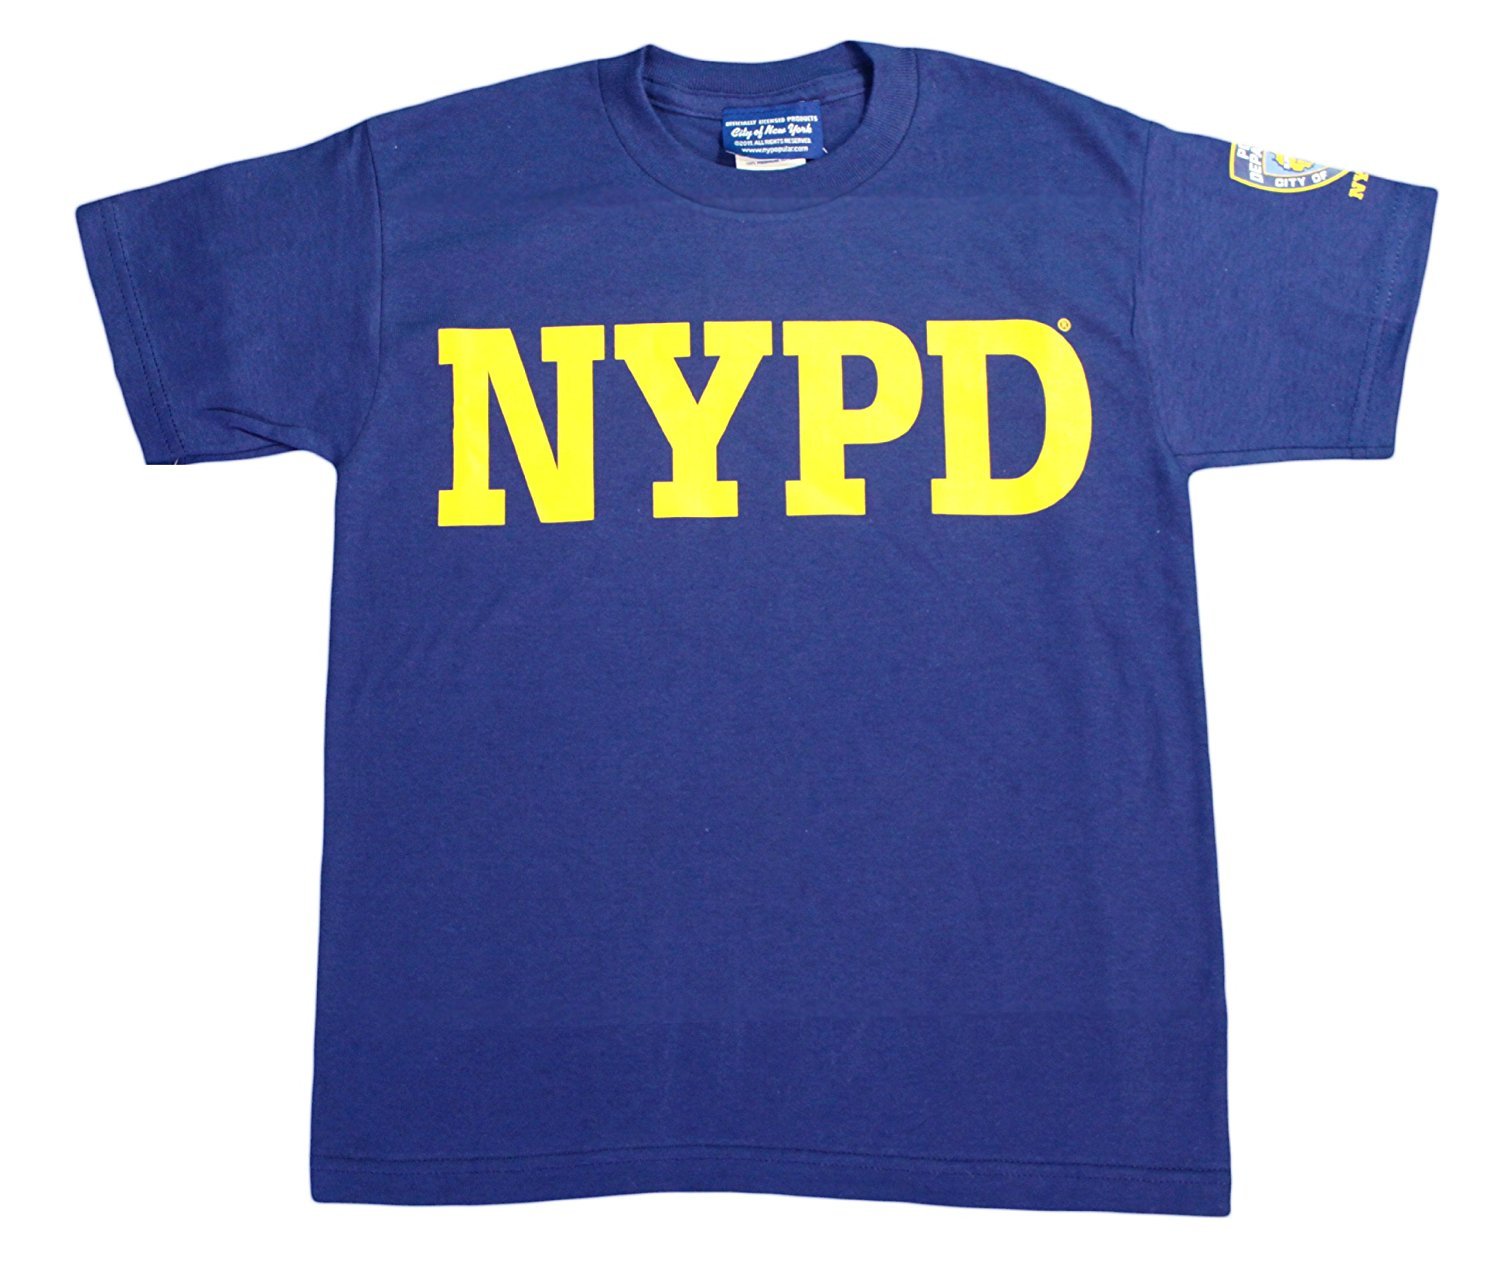 NYPD KIDS T-SHIRT OFFICIAL POLICE SHIRT FOR BOYS